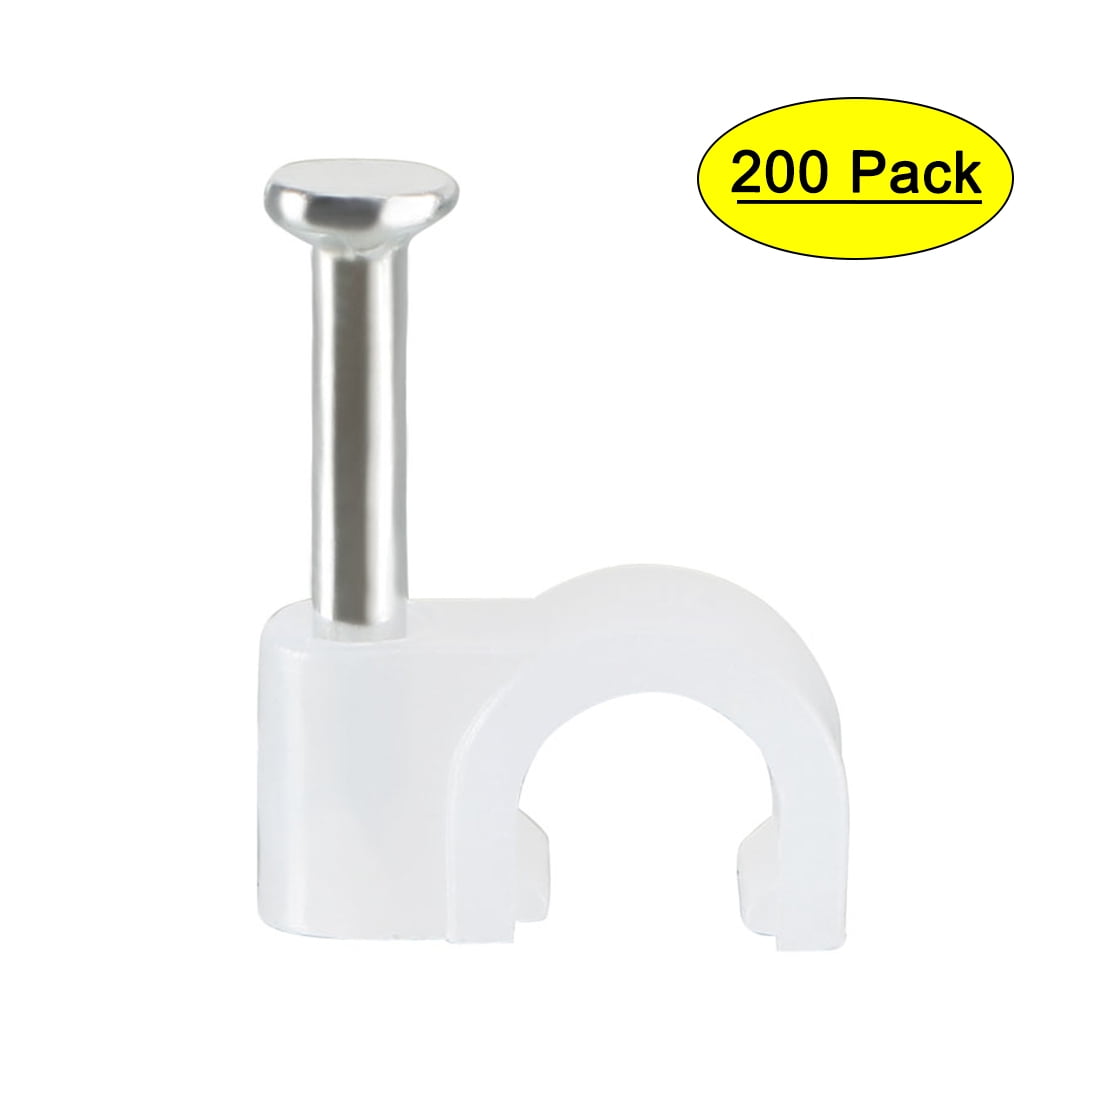 500 pack 3/16" Coax Cat5 Cat6 White R TYPE Cable Clamps Coaxial Wire Network